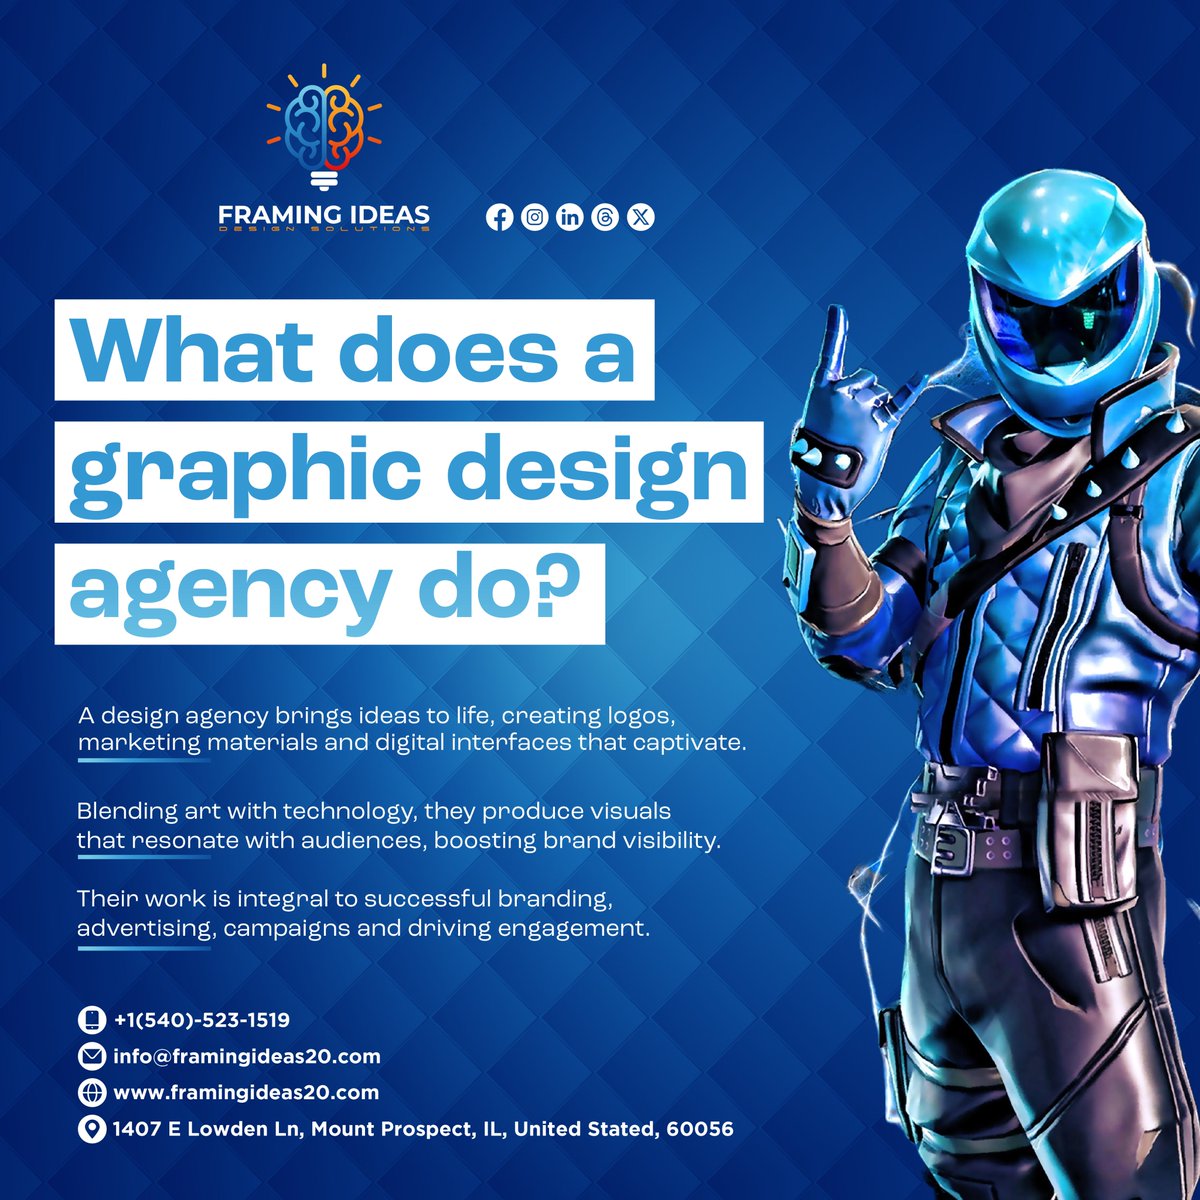 Ever wondered what a top-tier graphic design agency brings to the table? 🎨

#framingideas #framingideas20 #DesignAgencyExplained #VisualStrategy #CreativityUnleashed #BusinessBranding #DesignInspiration #ElevateYourBrand #AestheticAppeal #DesignMatters #ArtistryInDesign